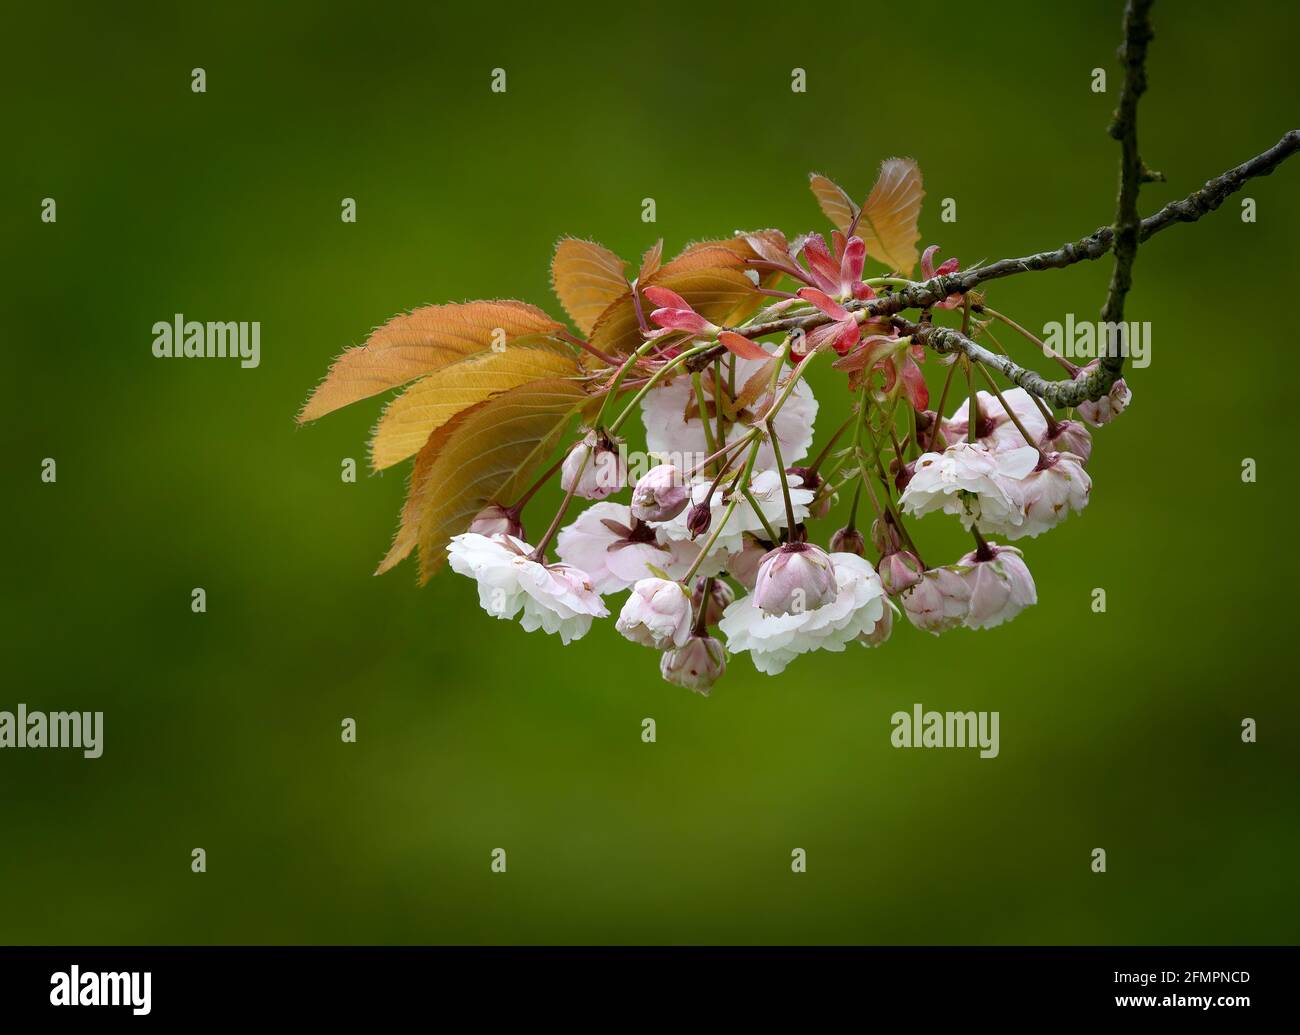 Beautiful Cherry Blossom (Prunus species) photographed against an out of focus green foliage background Stock Photo